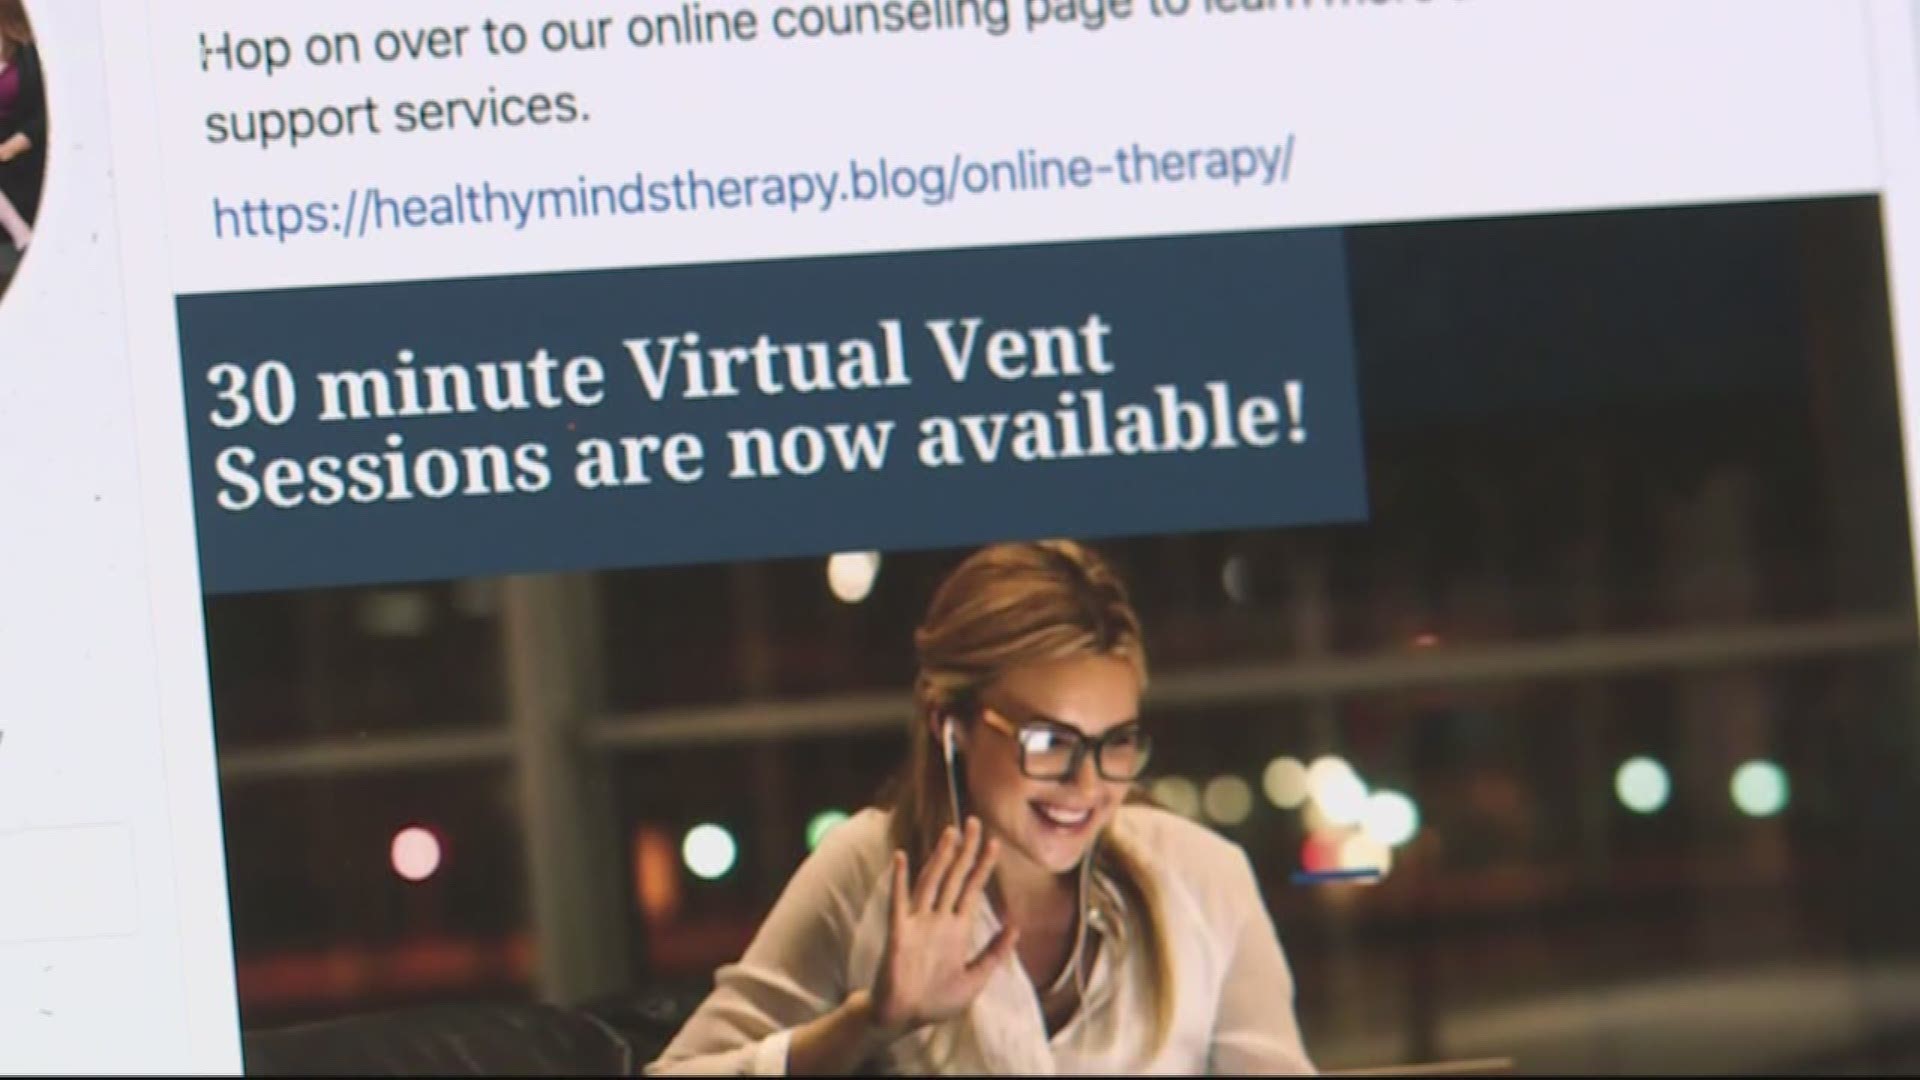 With the spread of coronavirus bringing plenty of stress, customers can buy $29 "virtual vent" sessions to speak with a licensed professional counselor.